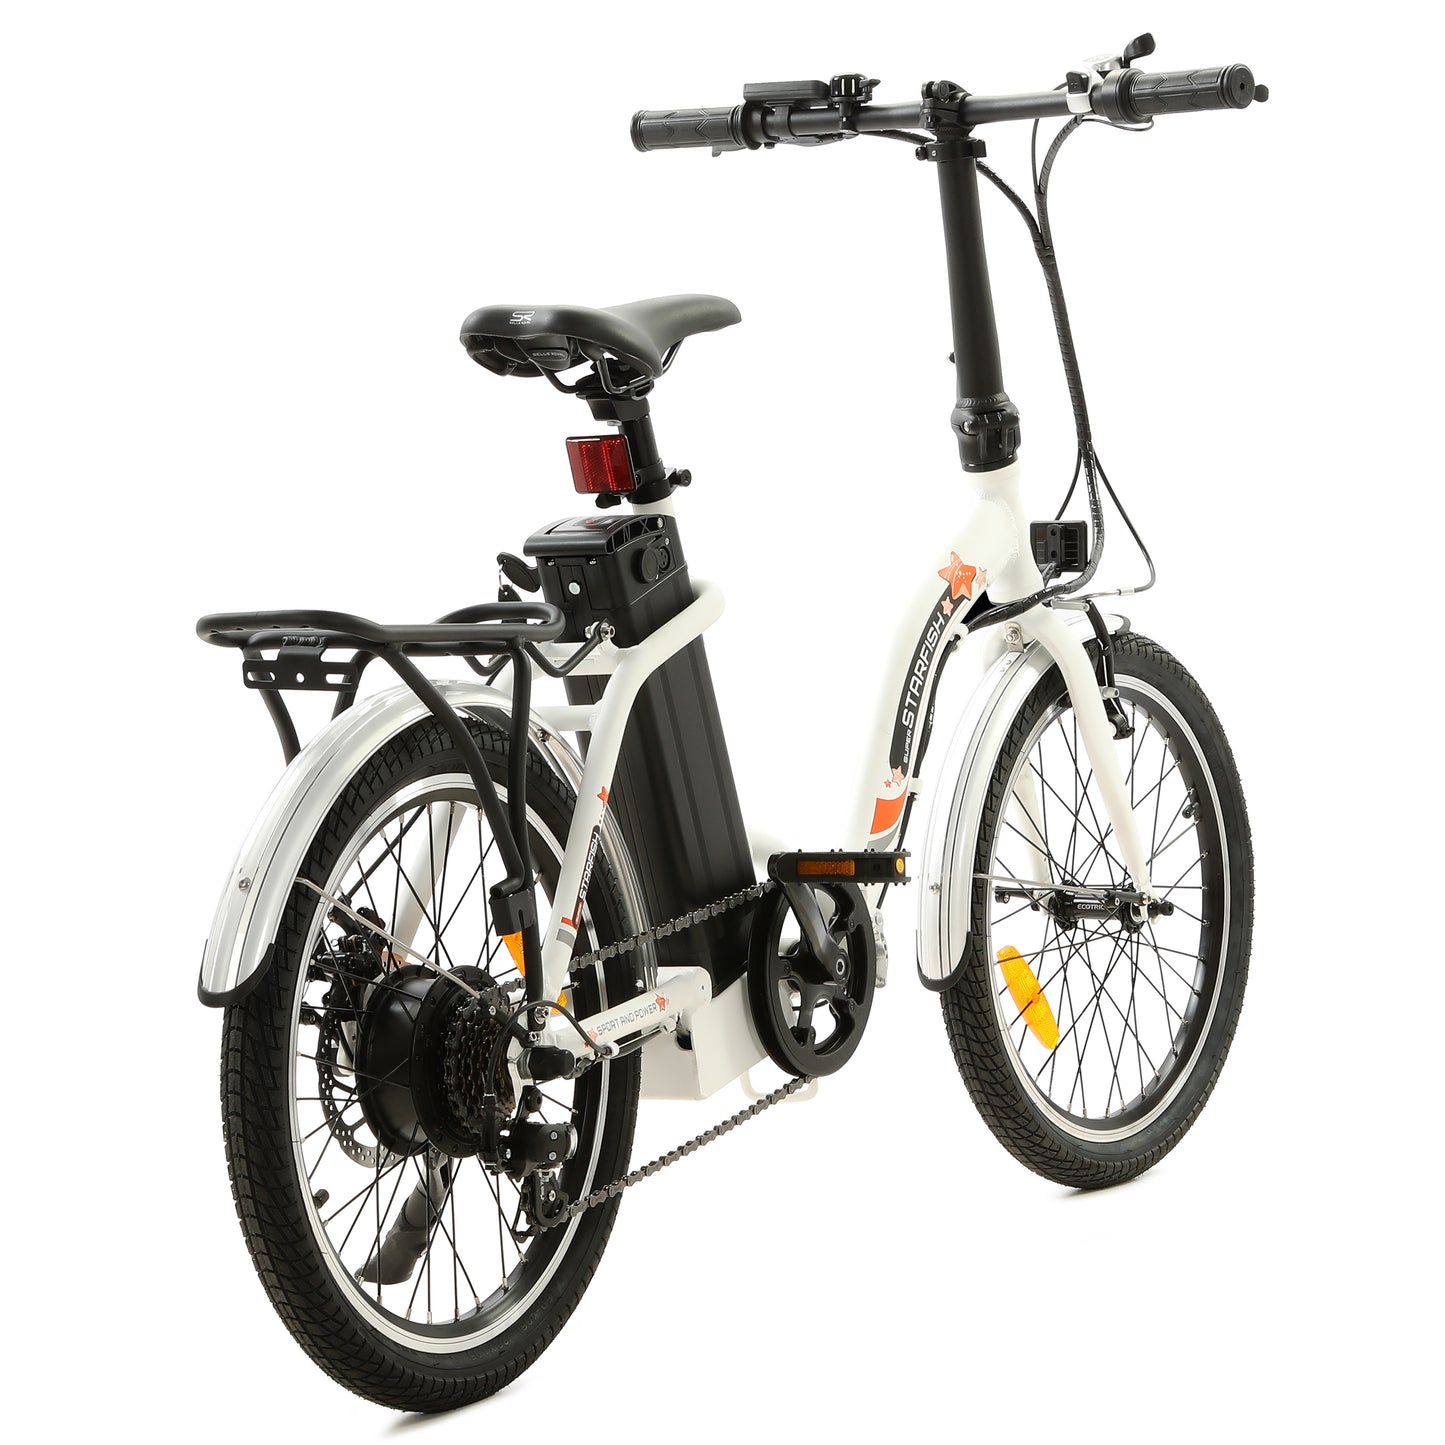 UL Certified-Ecotric Starfish 20inch Portable and Folding Electric Bike - White